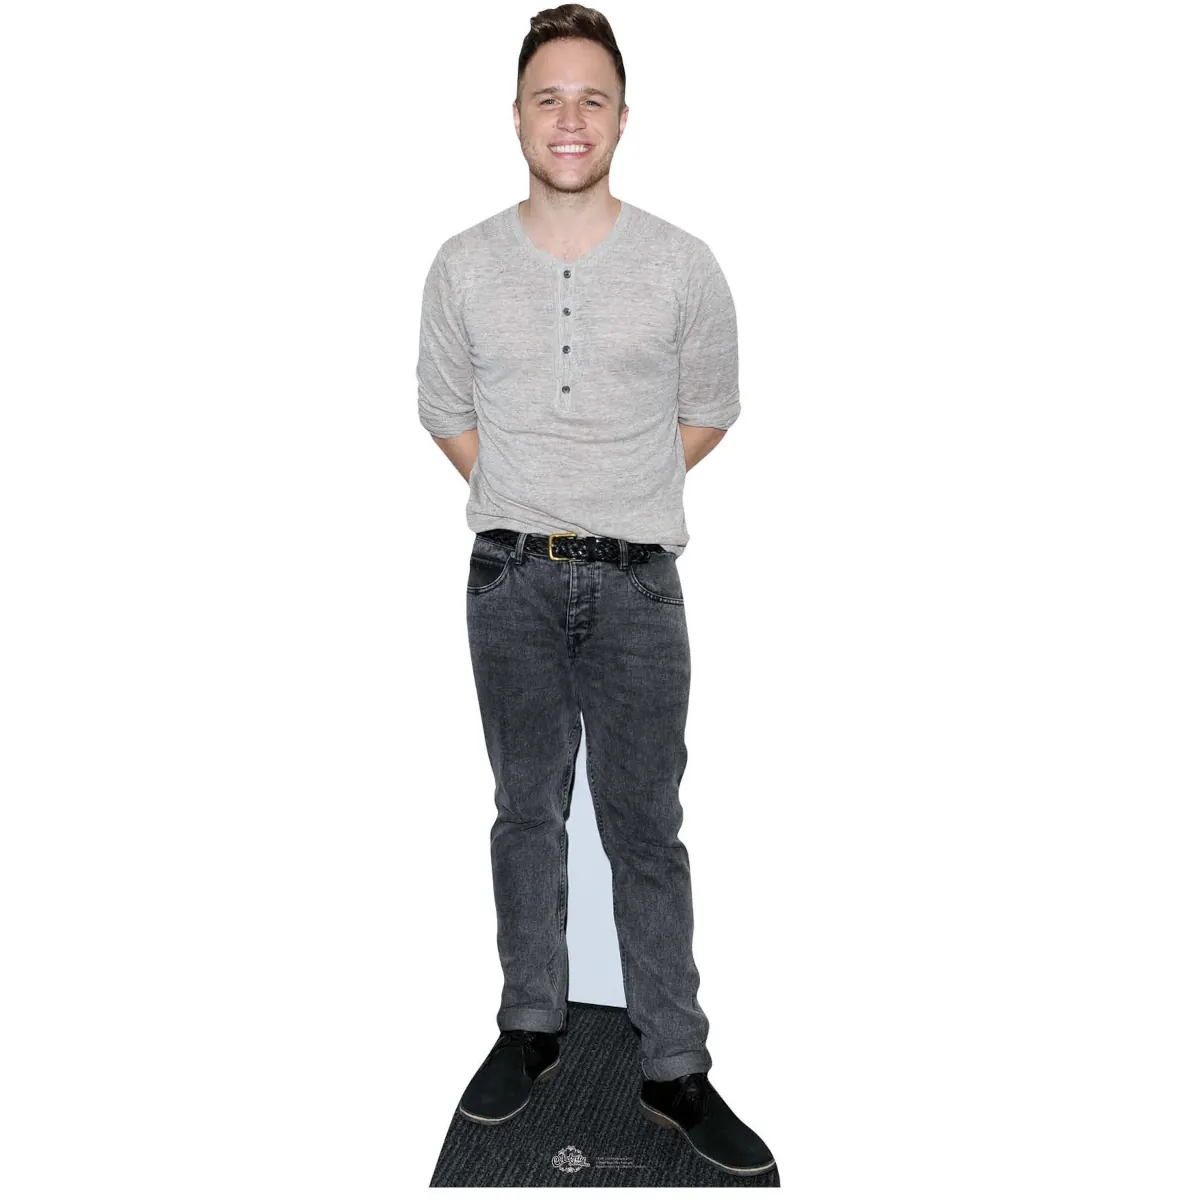 CS591 Olly Murs 'Casual' (English SingerSongwriter) Lifesize Cardboard Cutout Standee Front